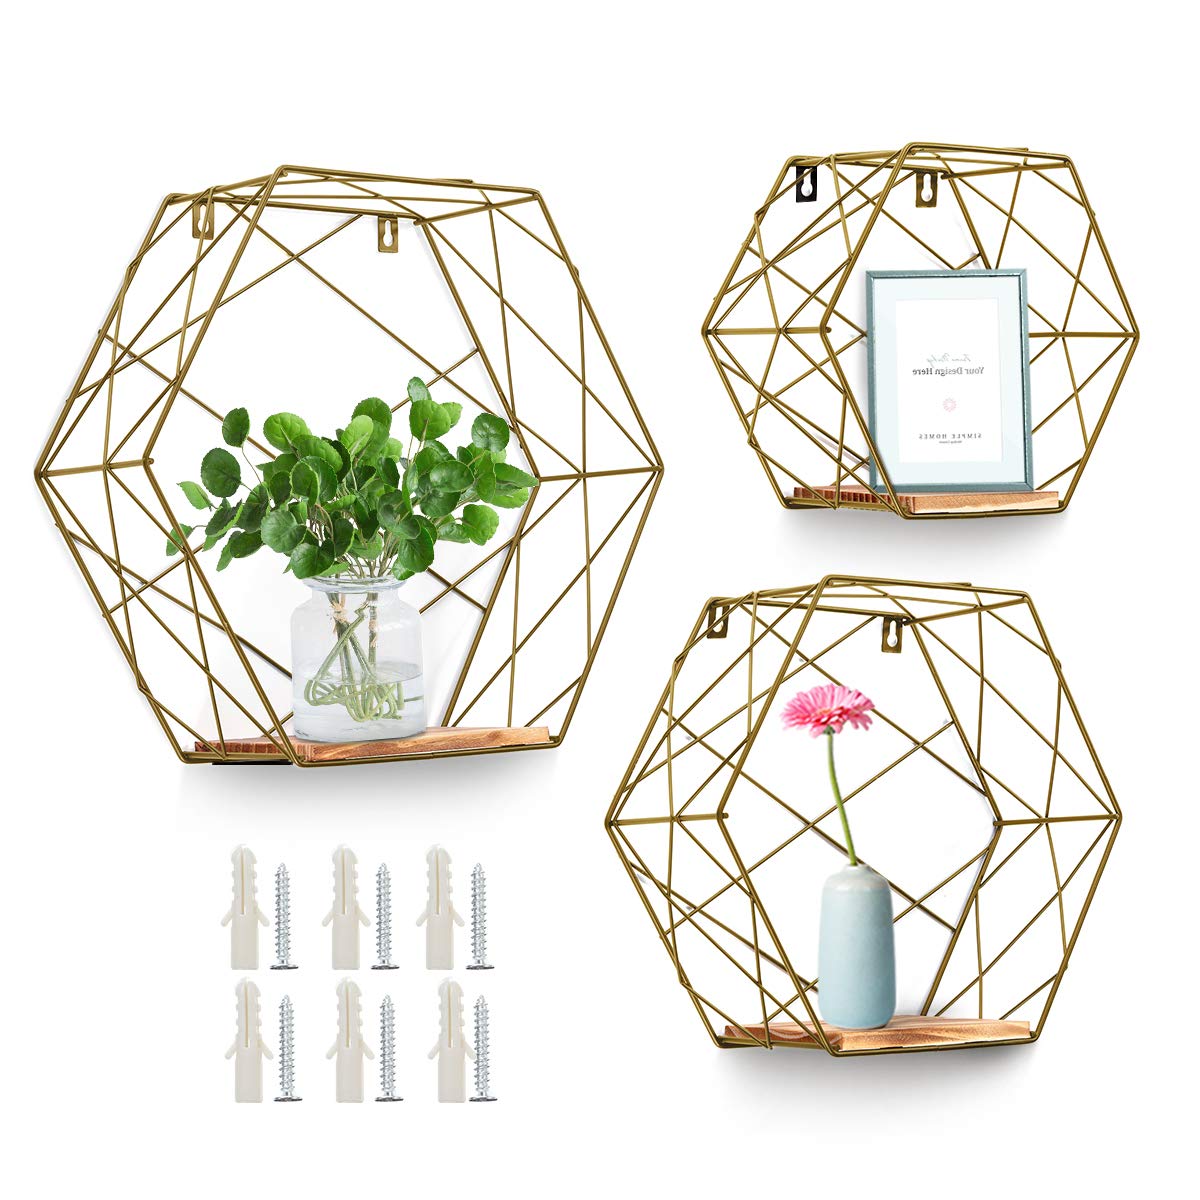 3Pcsset-Hexagonal-Wall-Mounted-Shelves-Floating-Wall-Storage-Rack-Holder-Organizer-Display-Stand-Hom-1792546-5